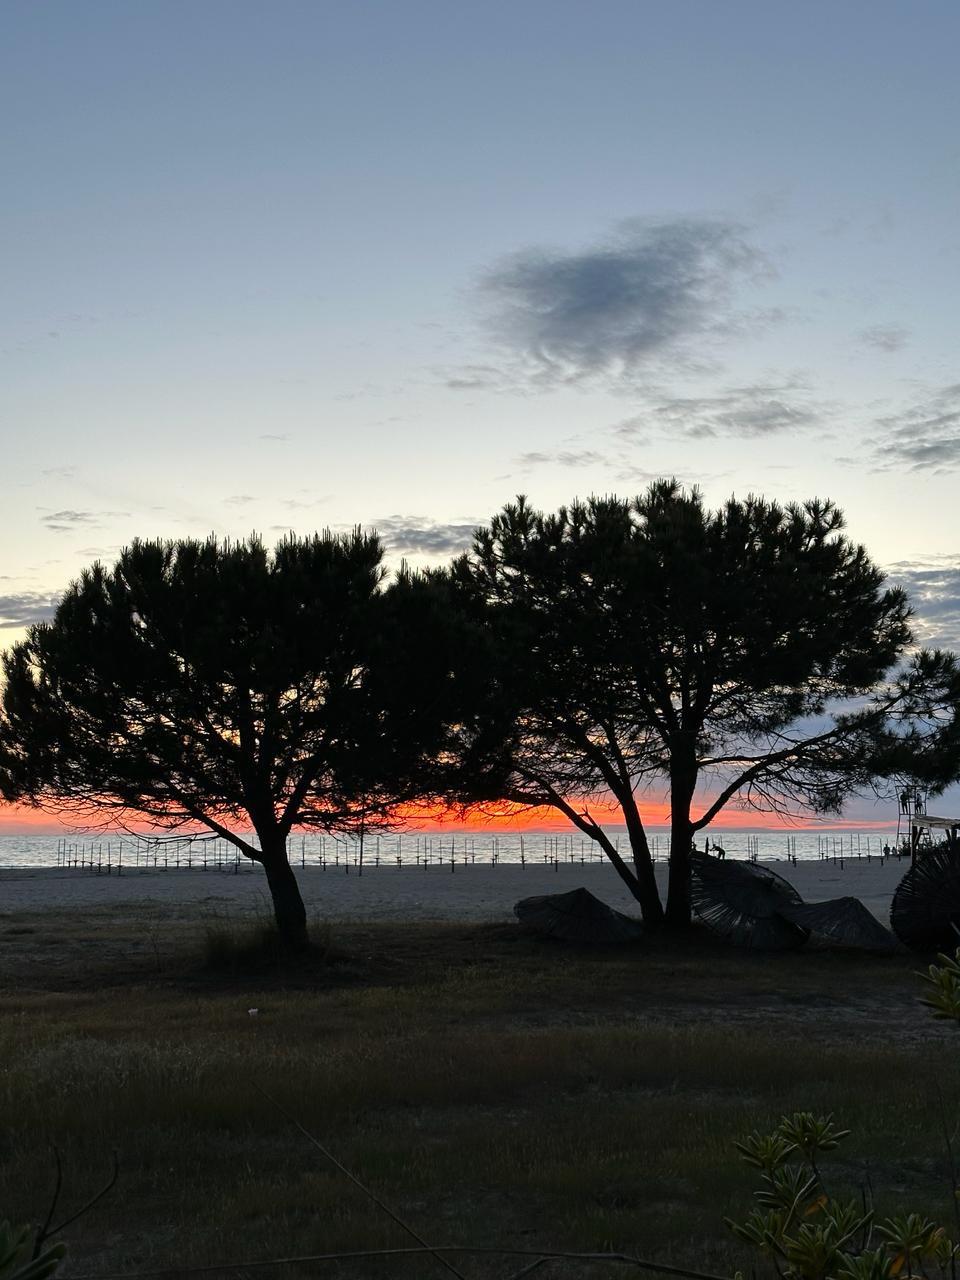 Sea and trees in a sunset